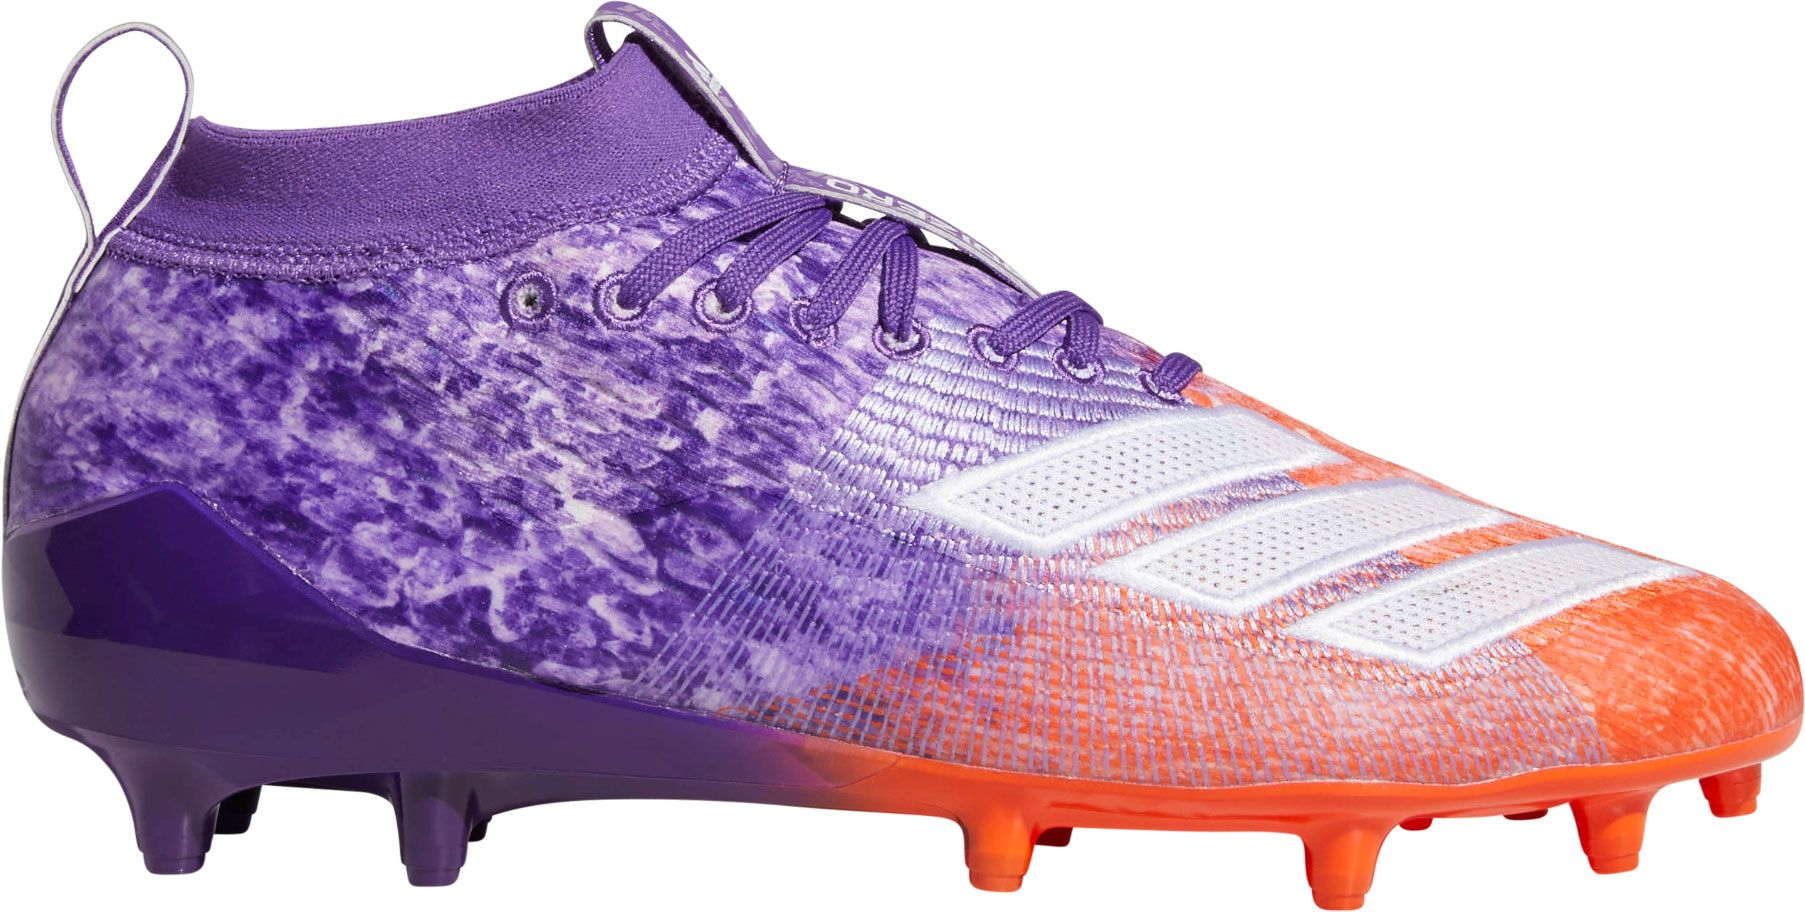 purple and white football cleats